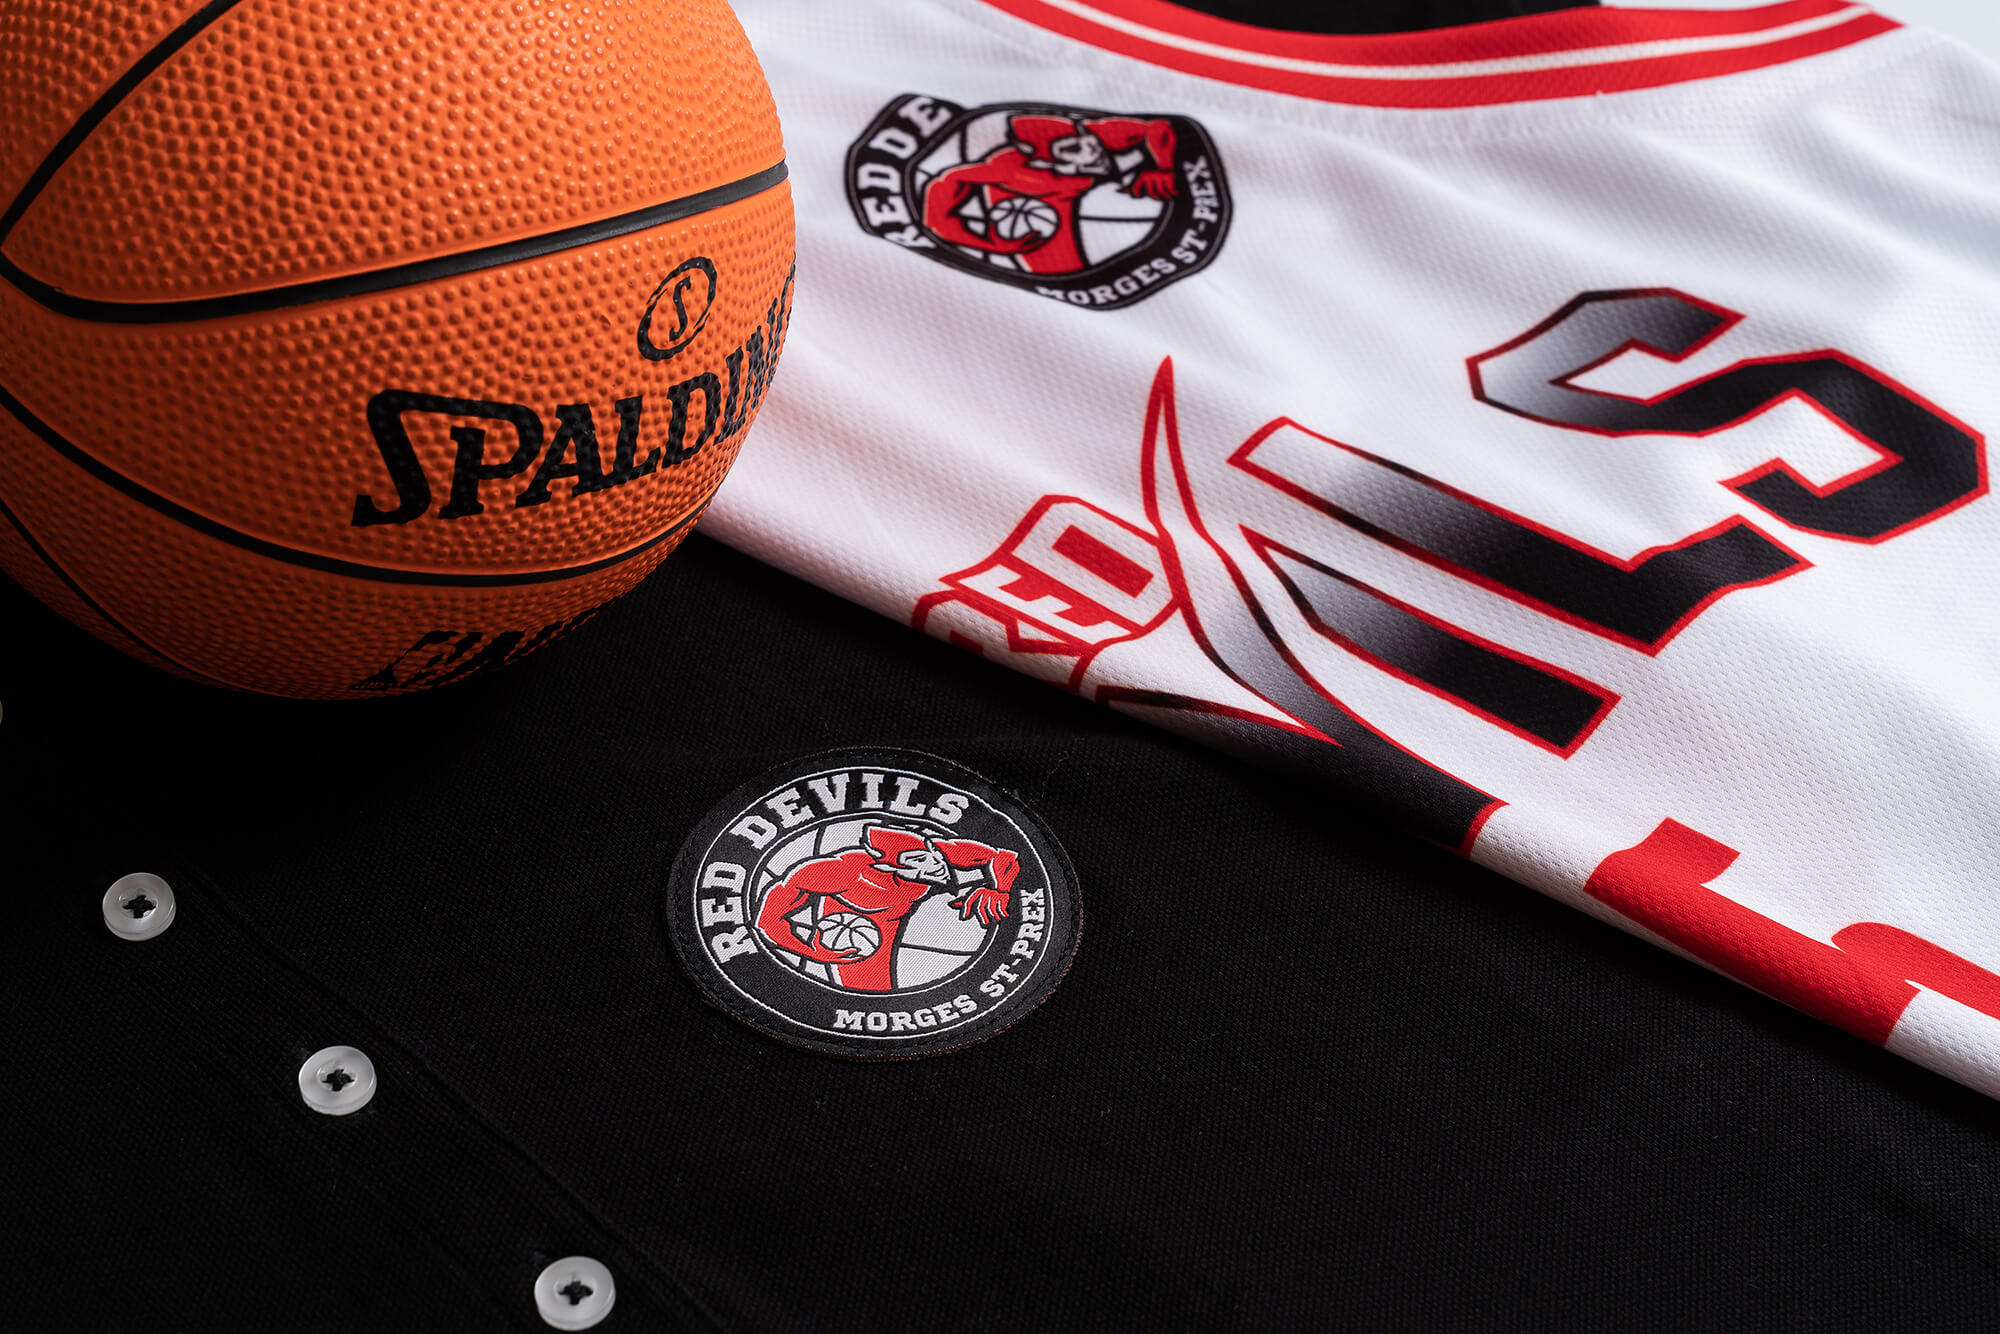 Maillot LNB & Polo comité - Red Devils Basketball Morges St-Prex